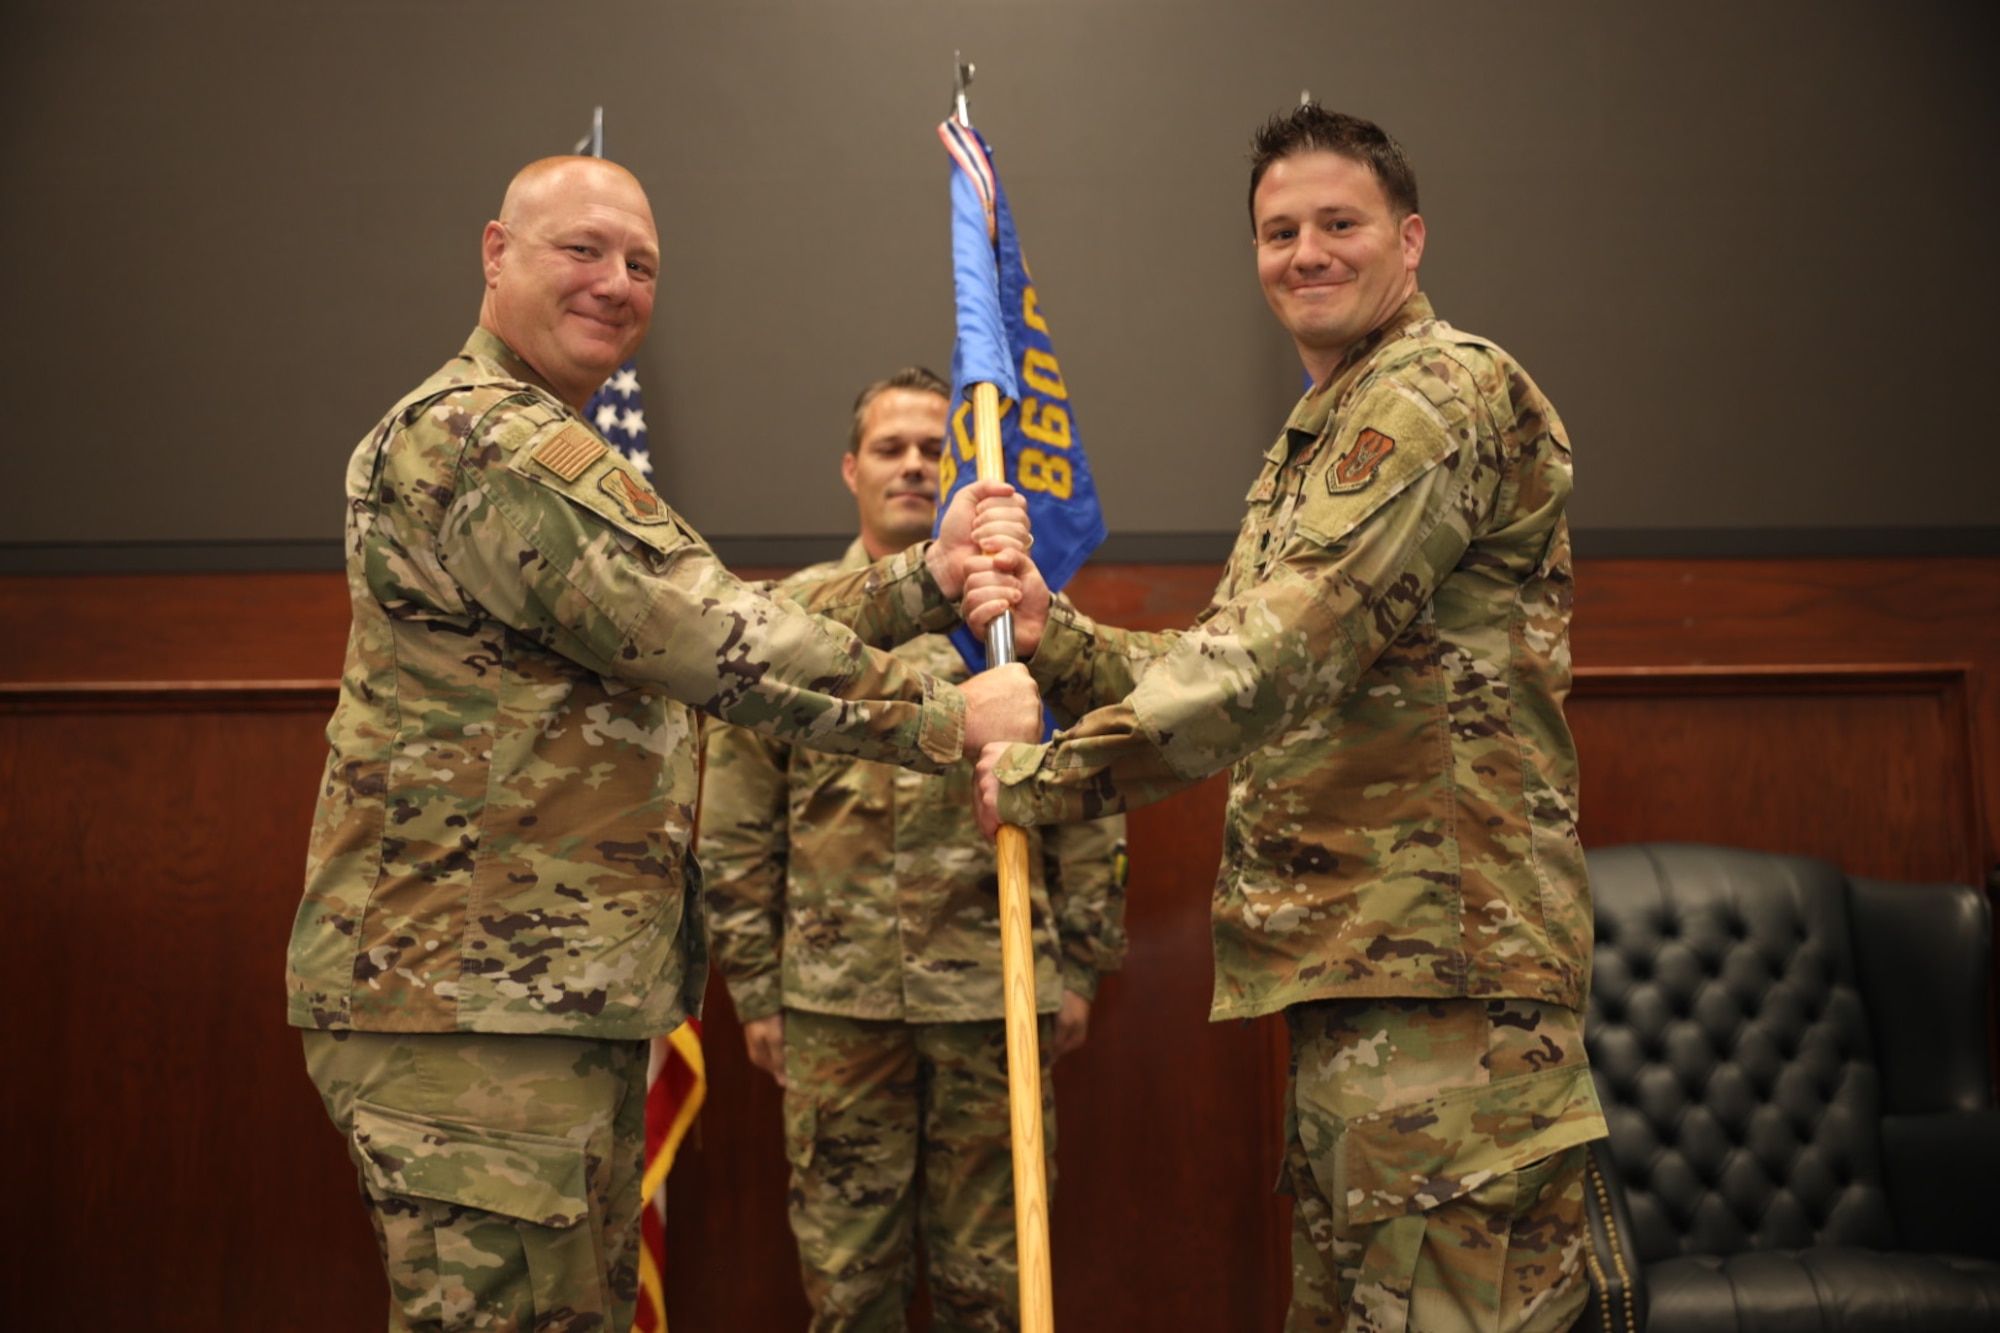 Col. Thaddeus Janicki, 860th Cyberspace Operations Group commander, passes the guidon to Lt. Col. Nathaniel Ferraco, signifying his assumption of command of the 35th Combat Communications Squadron June 4, 2022, at Tinker Air Force Base, Oklahoma.